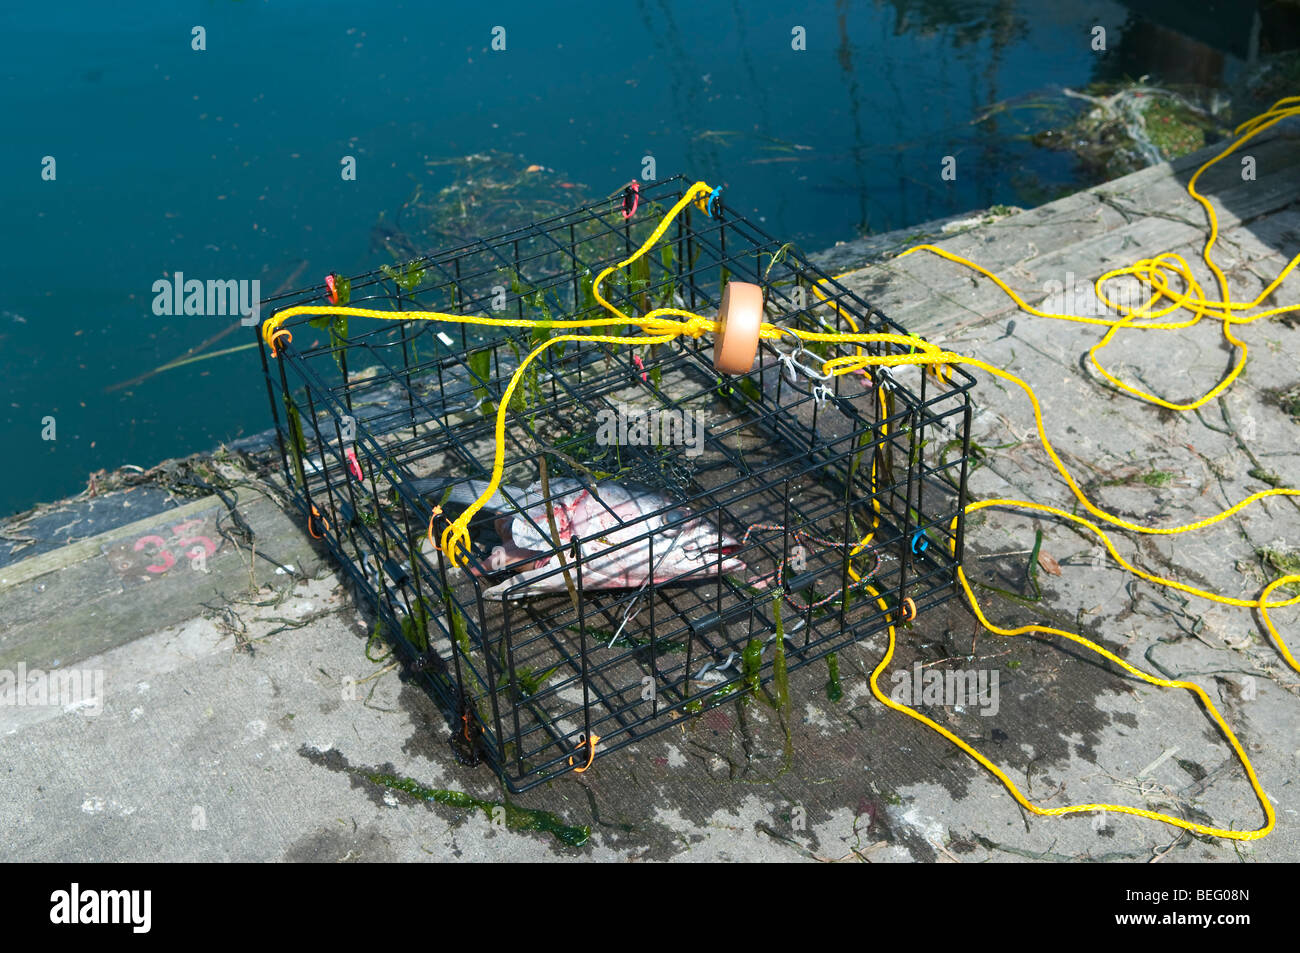 Crab trap or crab pot loaded with a fish head for bait. Stock Photo